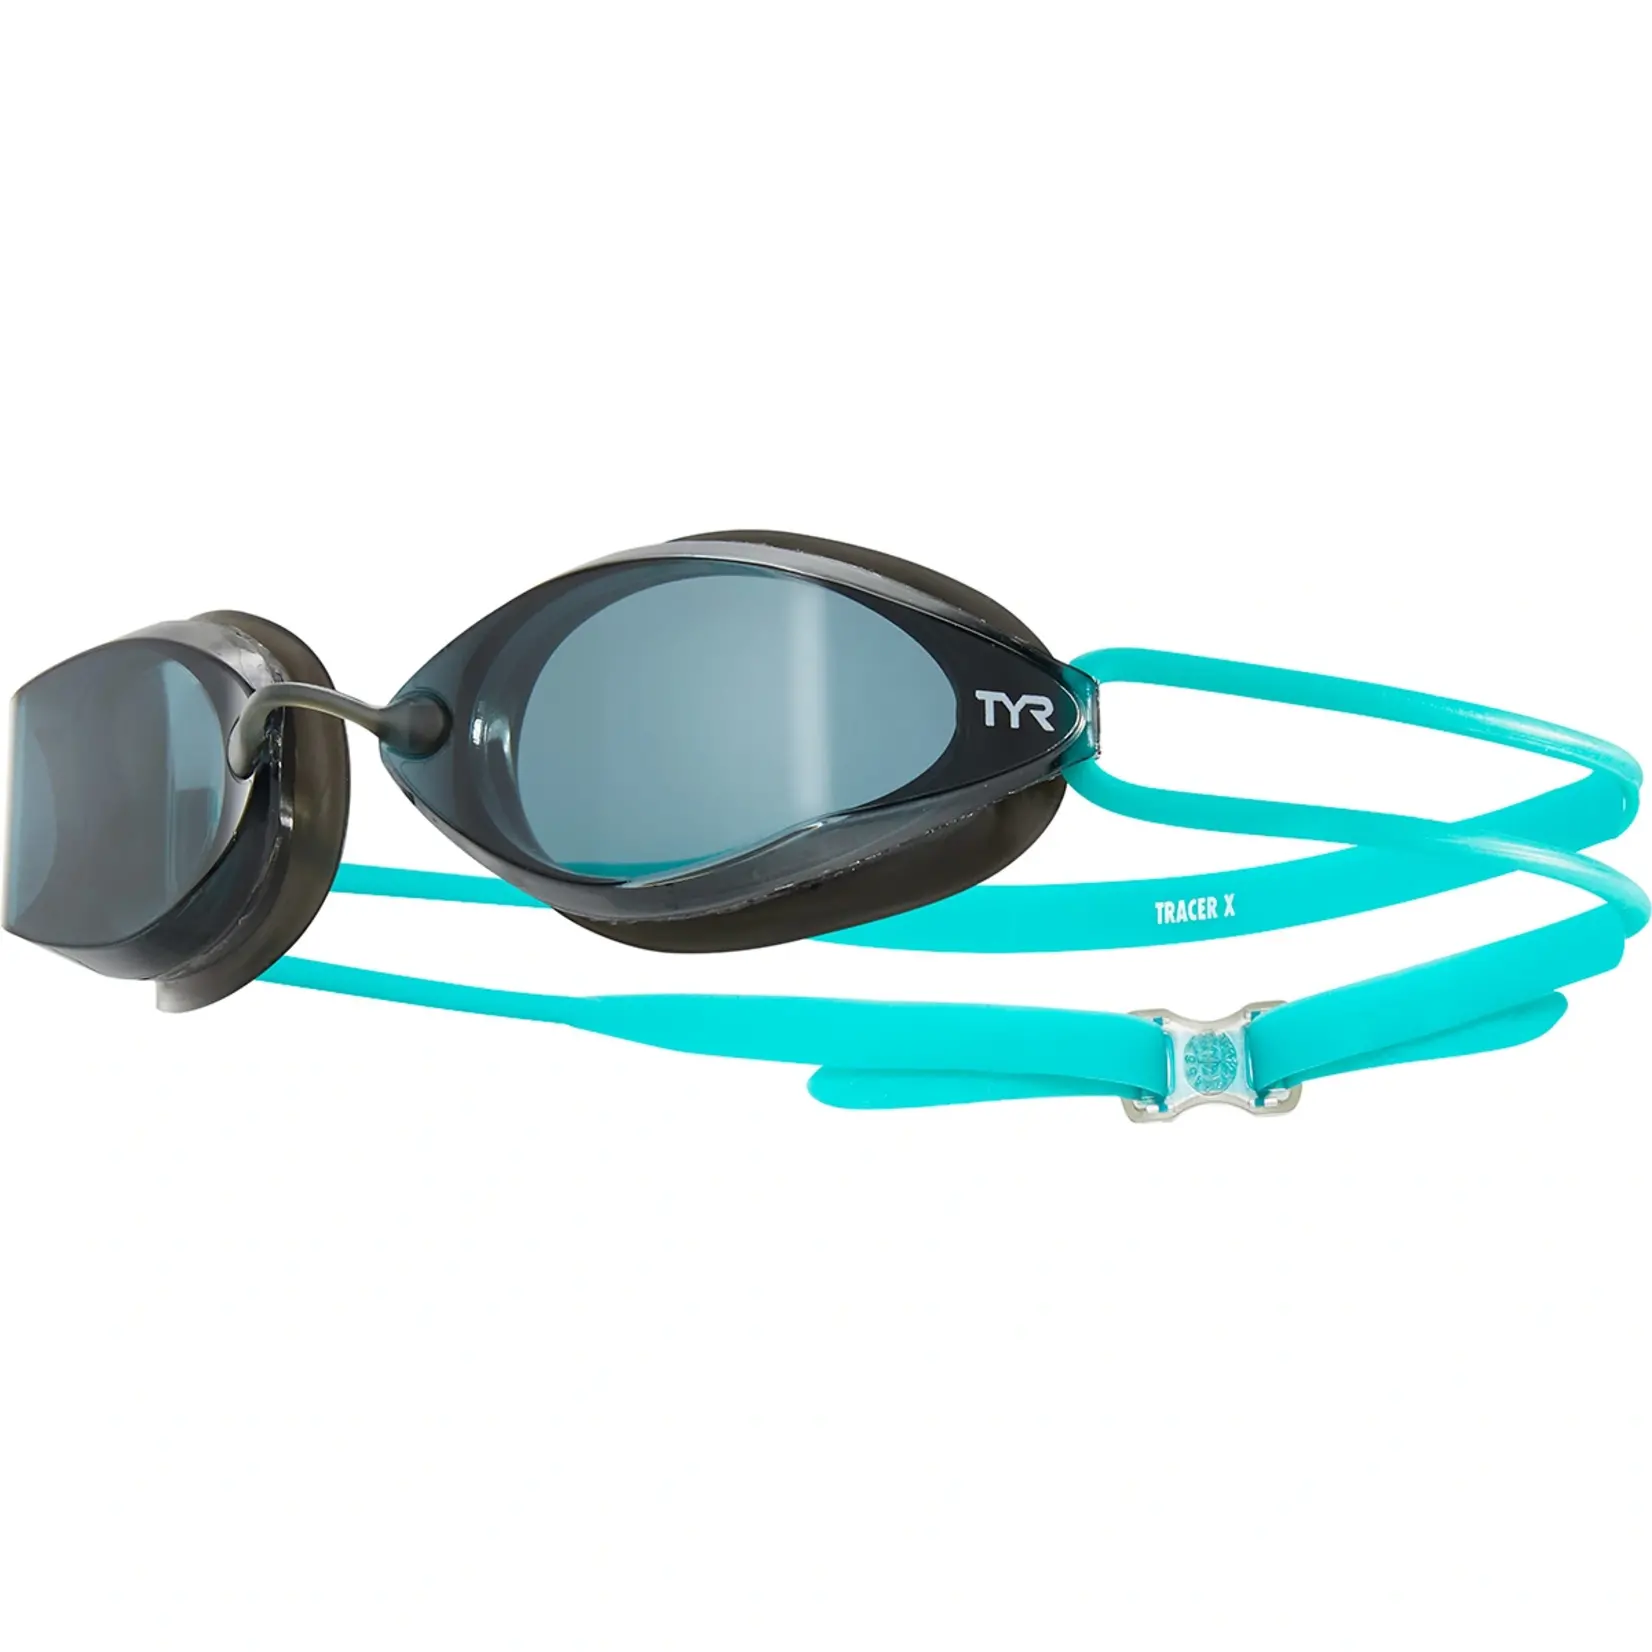 TYR TYR NANO-FIT TRACER-X RACING GOGGLES